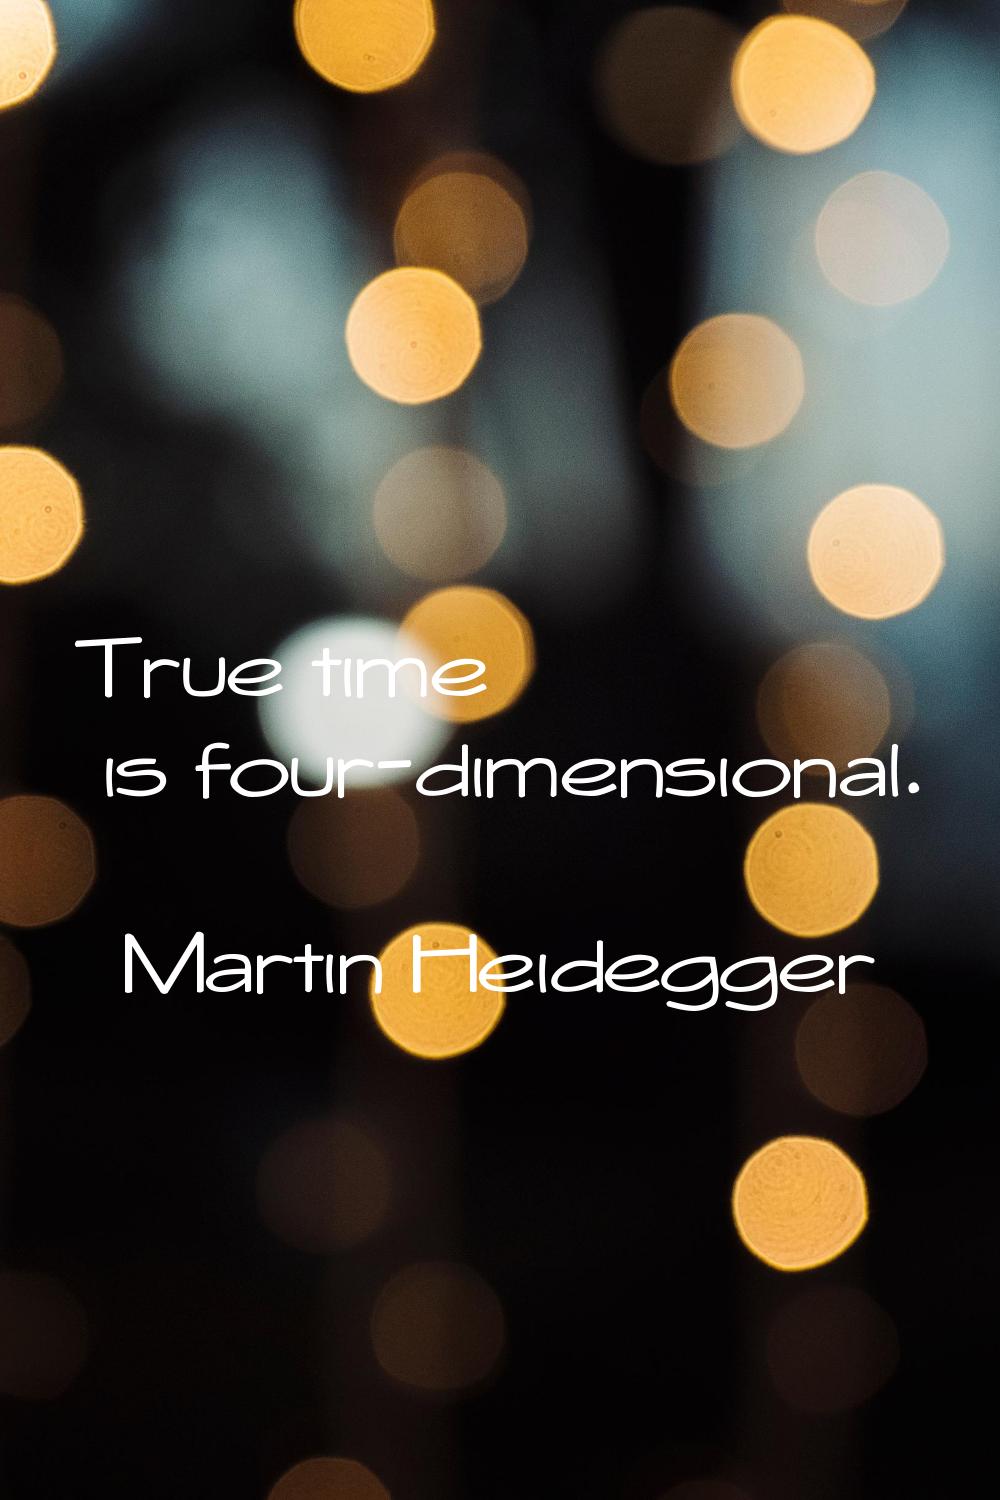 True time is four-dimensional.